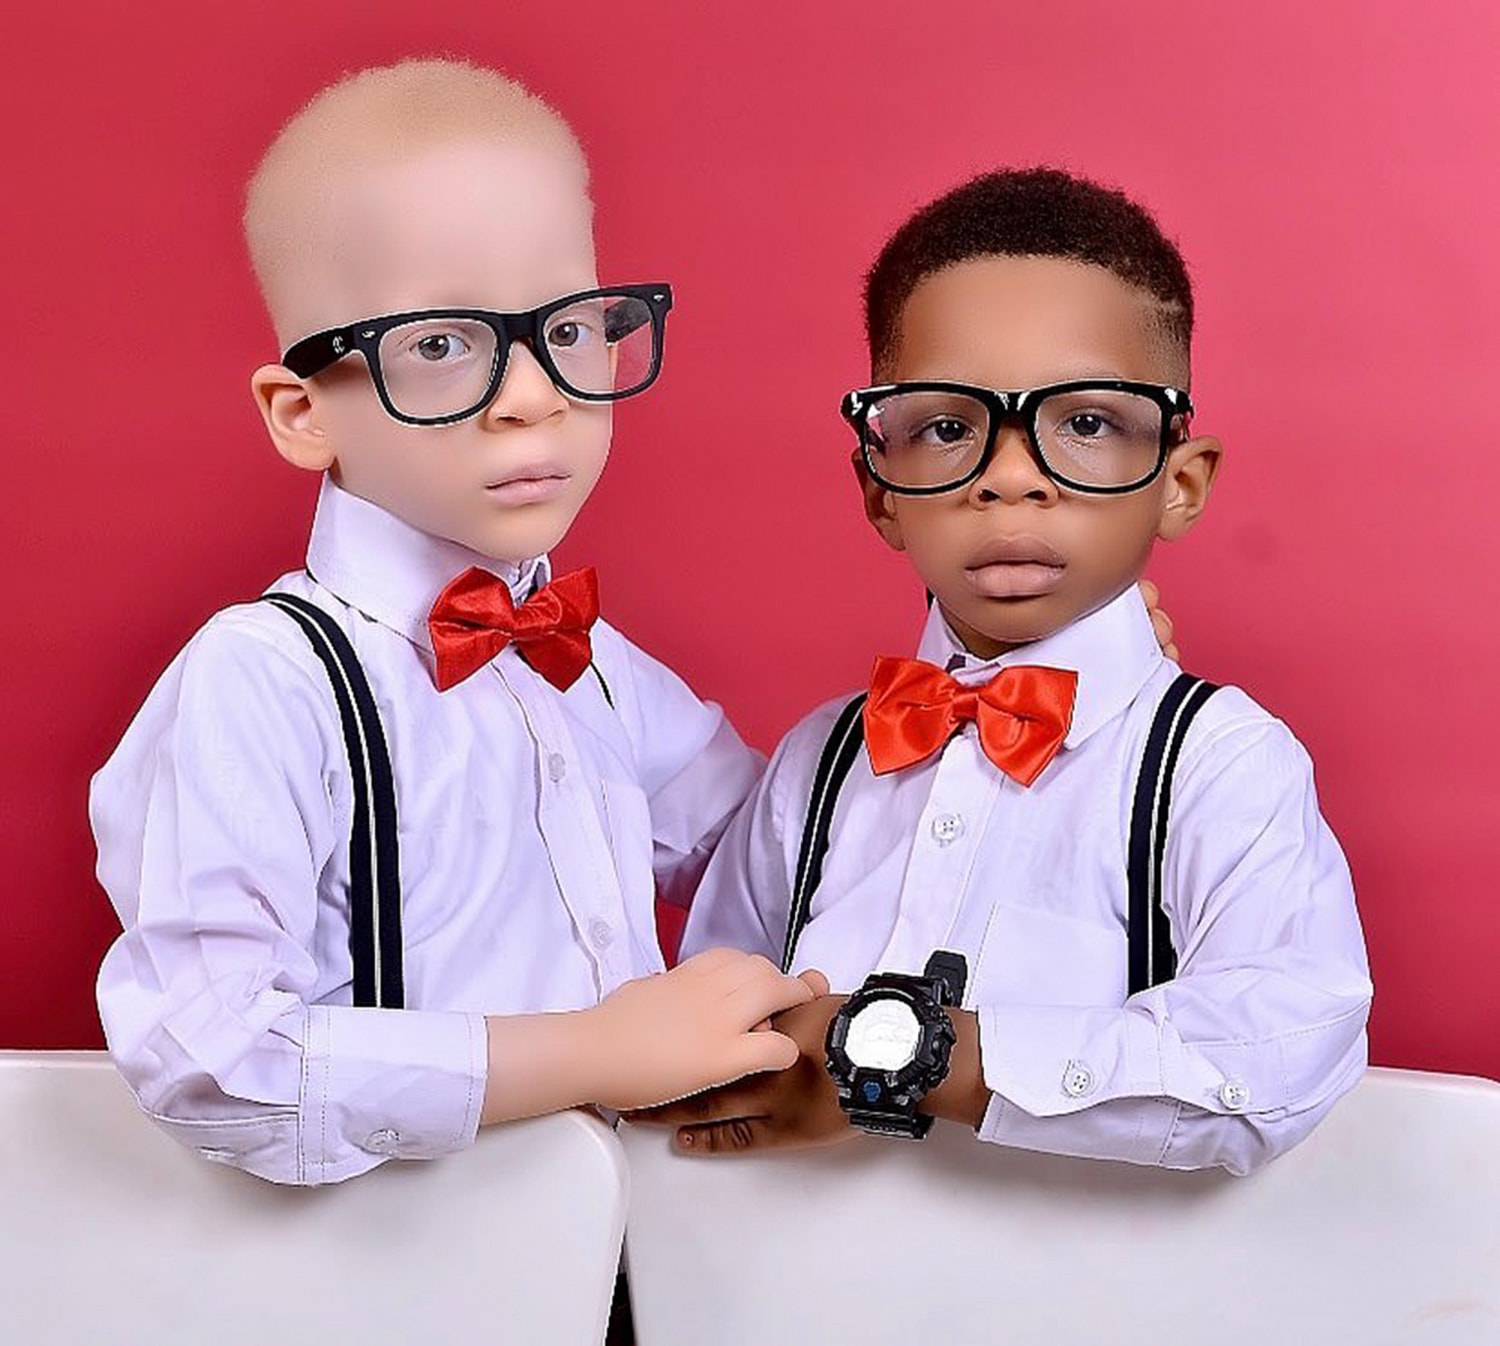 Twins Blind Dating 7 Guys Based on Their Outfits 